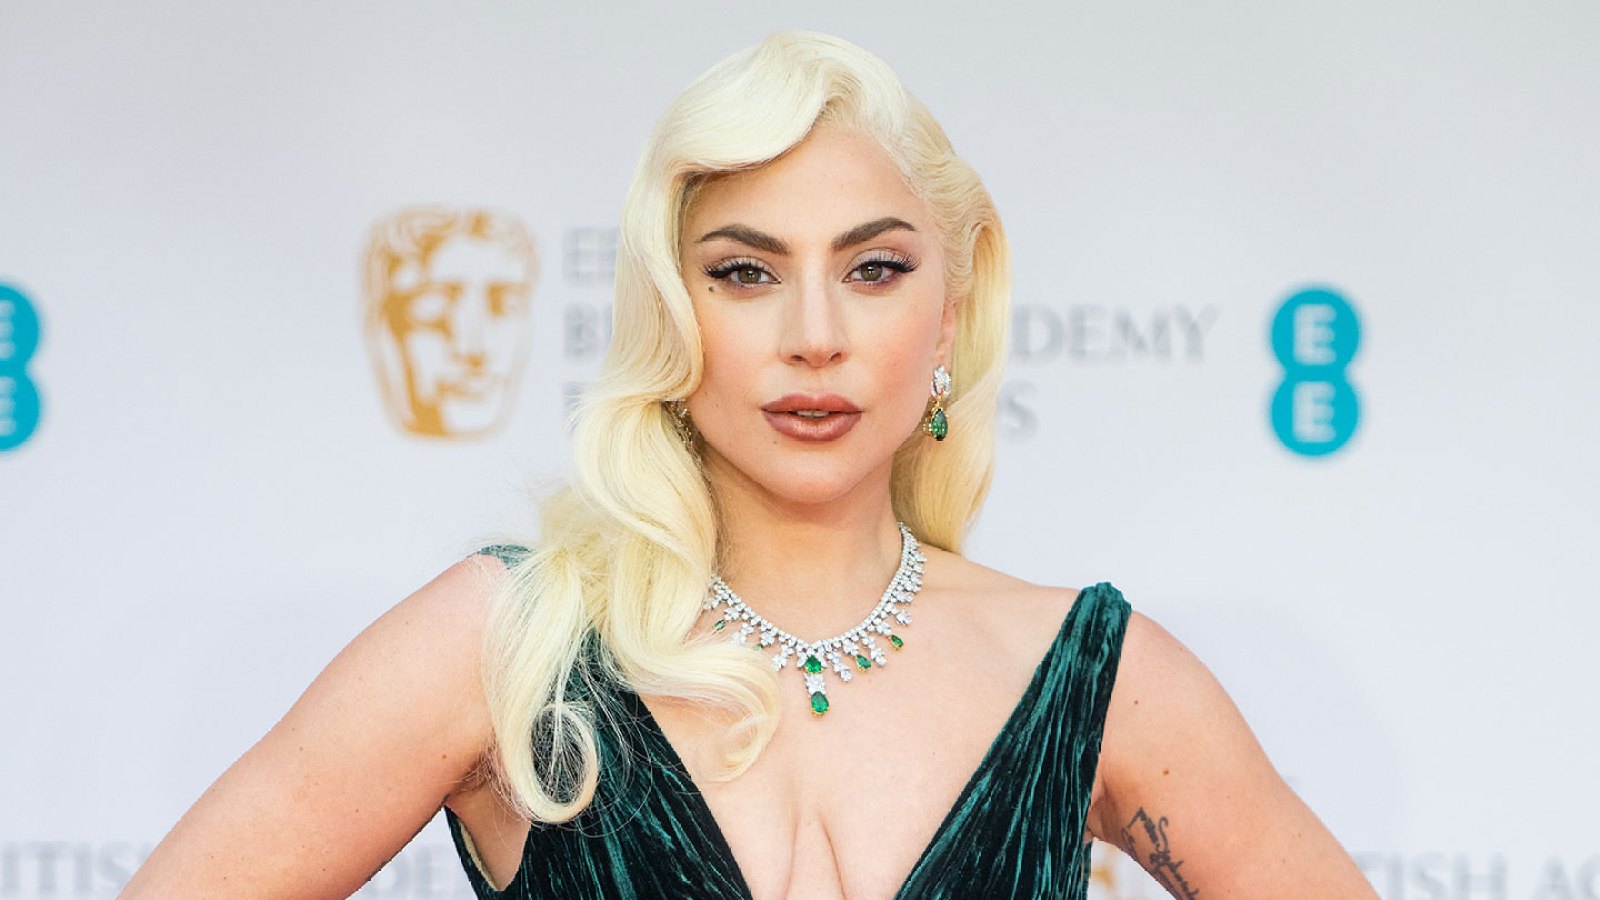 Lady Gaga Says Getting Glam Is a Healing Practice